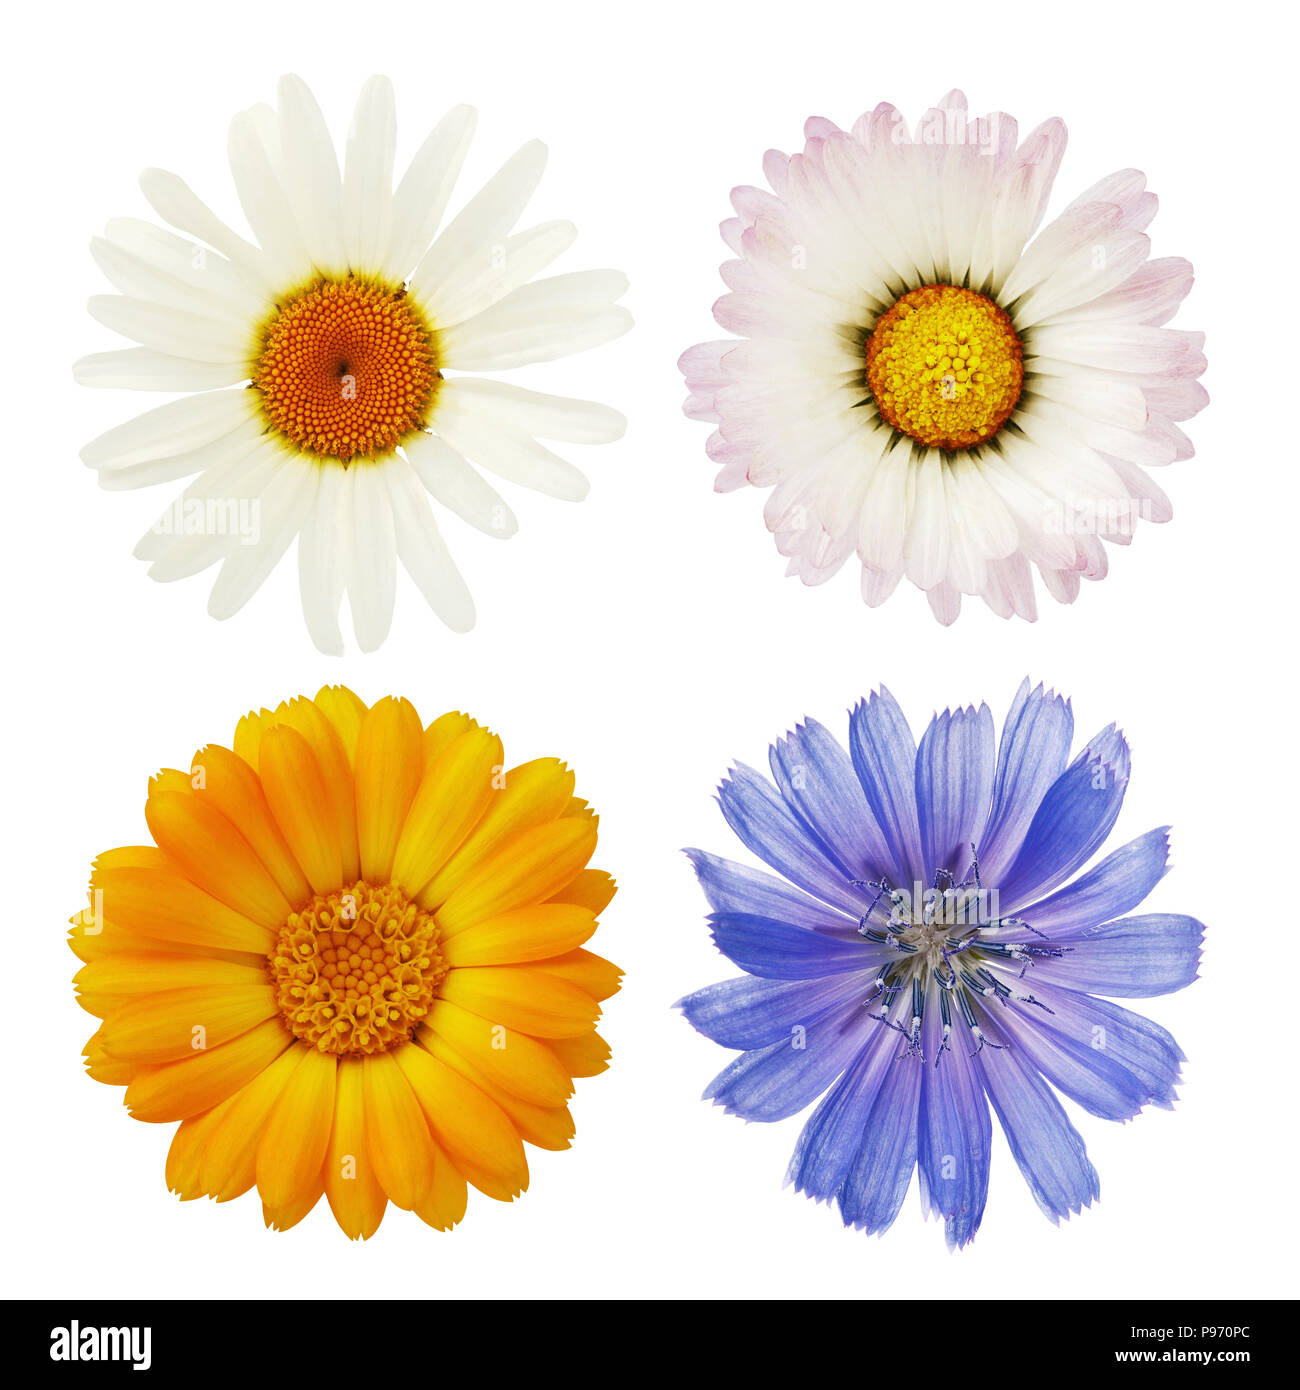 Wild chamomile flowers, marigold and chicory are photographed close-up with a top view and isolated on a white background Stock Photo